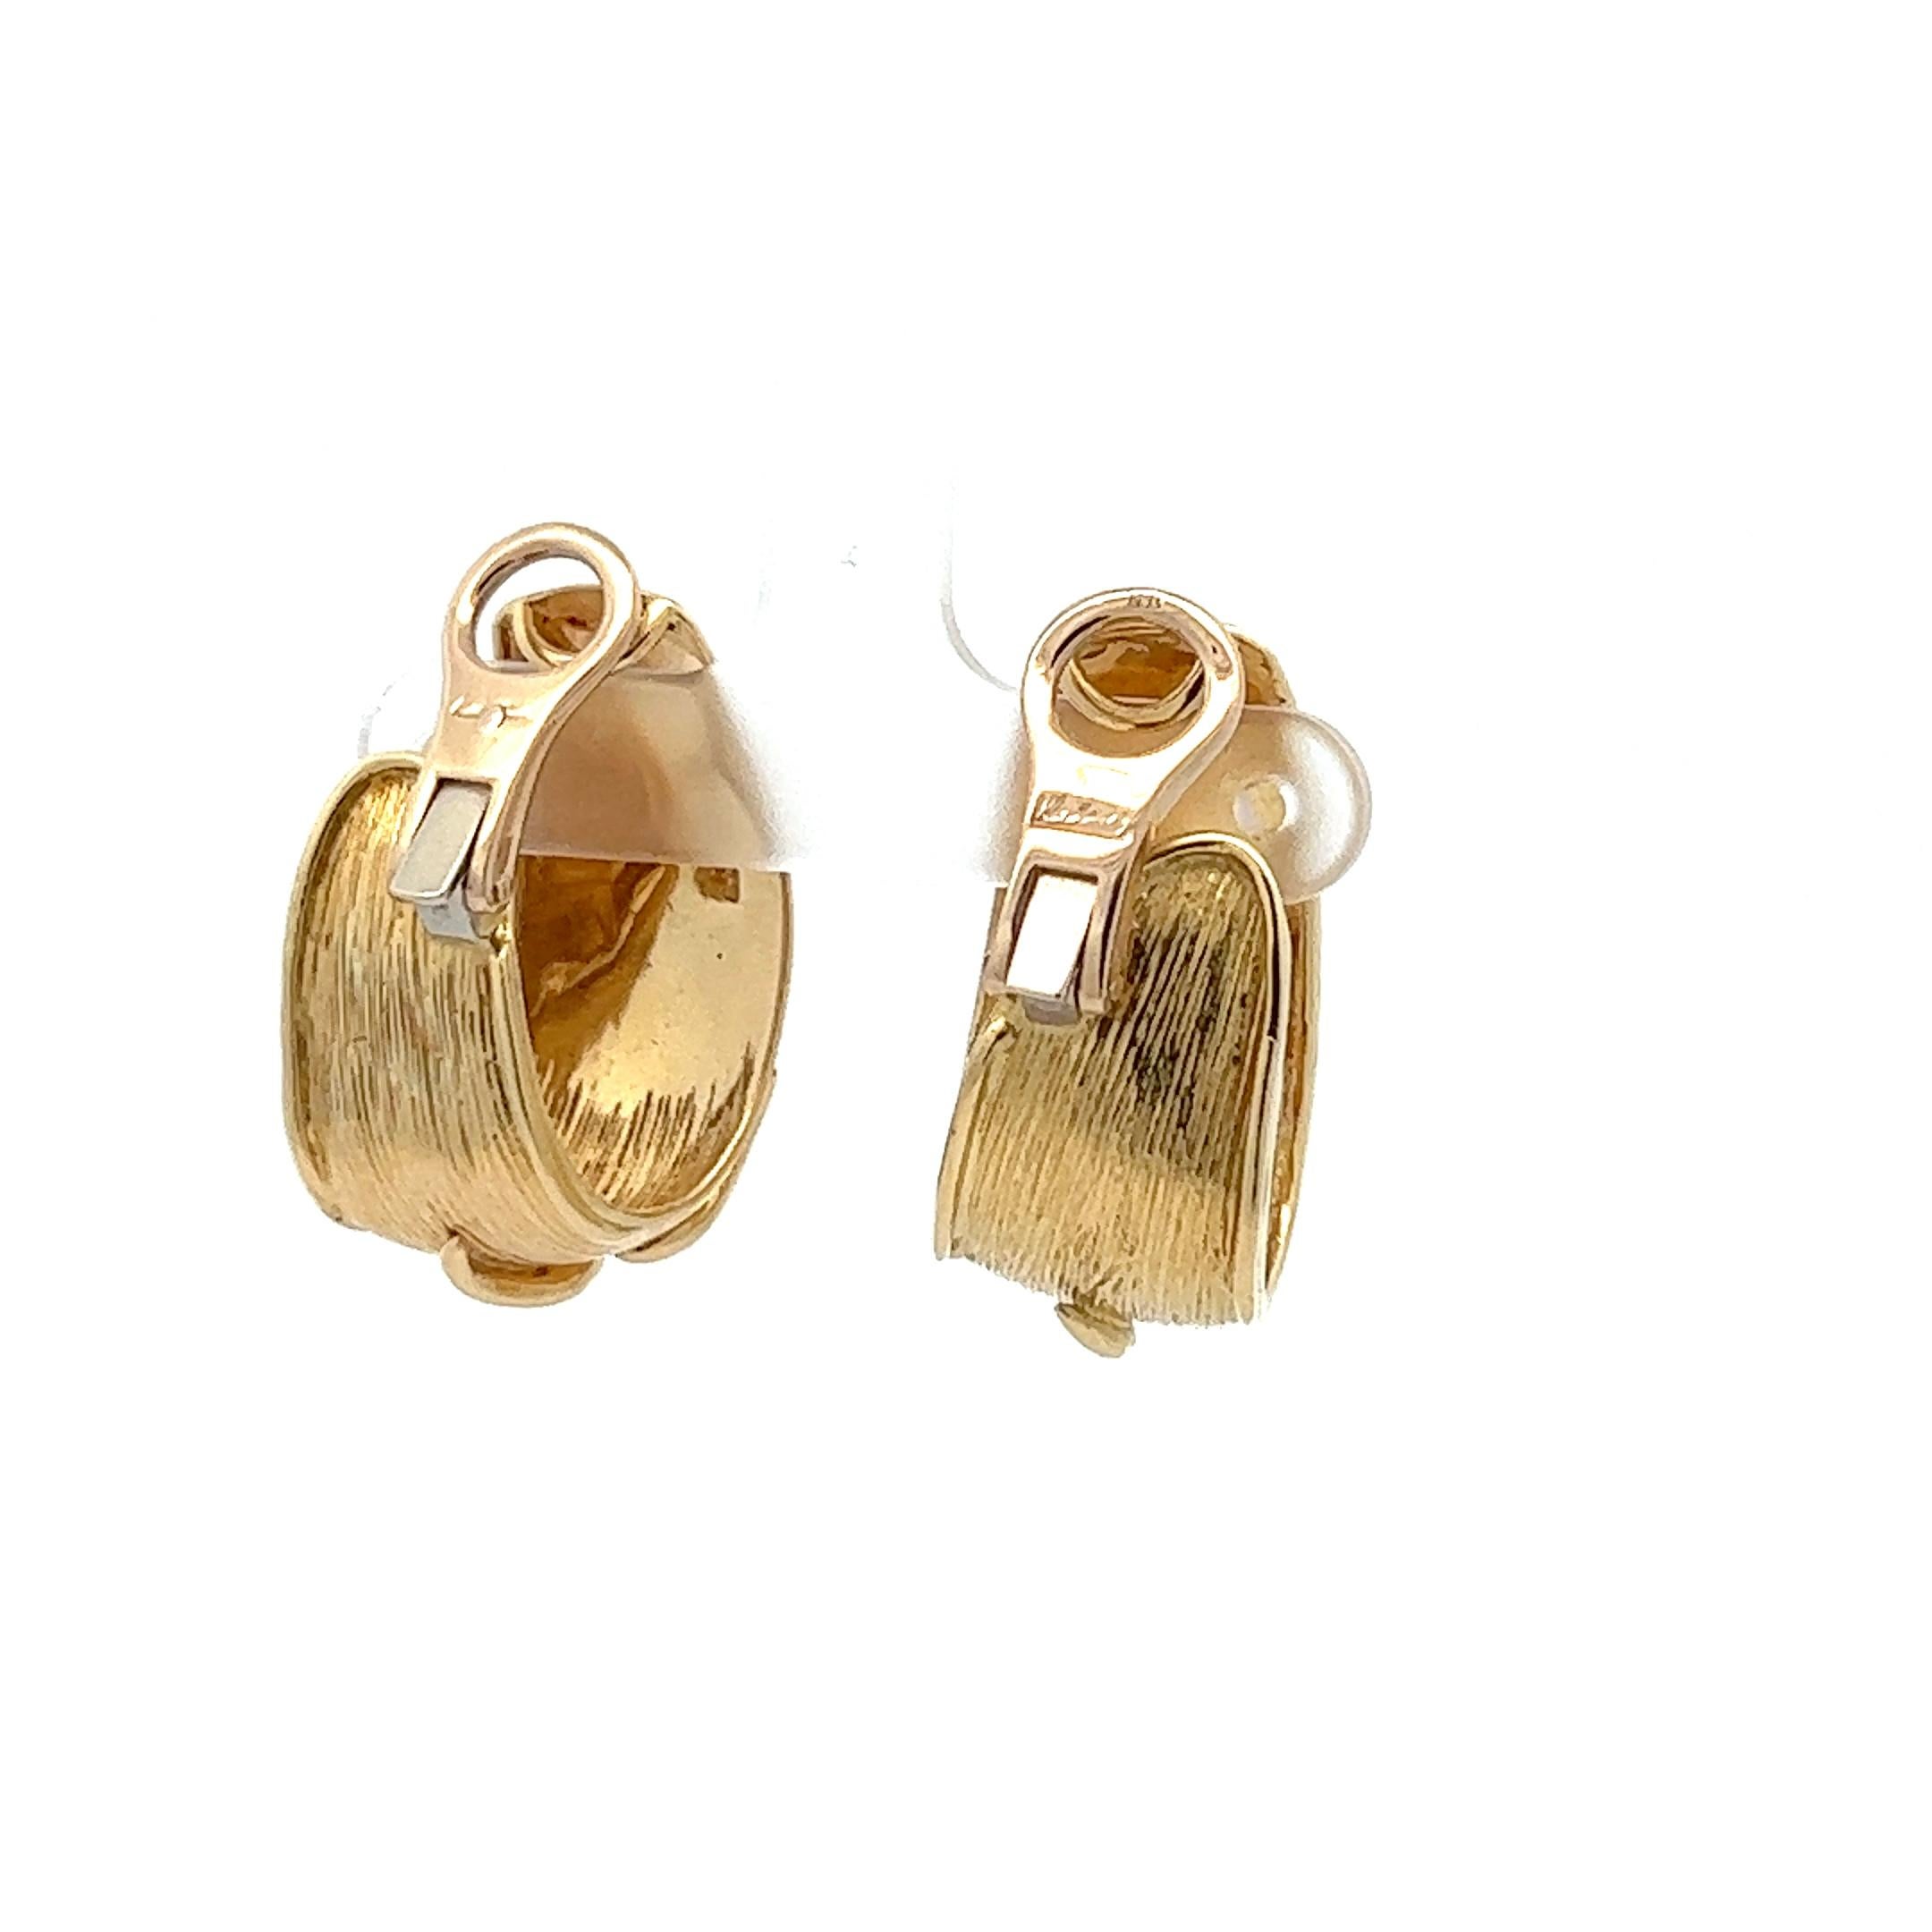 A pair of 18k yellow ear clips by Kutchinsky.
The ear clips were made in London, UK in 1970.
The ear clips are circa 3.1 cm long.

These ear clips can be changed into earrings suitable for pierced ears.

The ear clips are marked with the UK